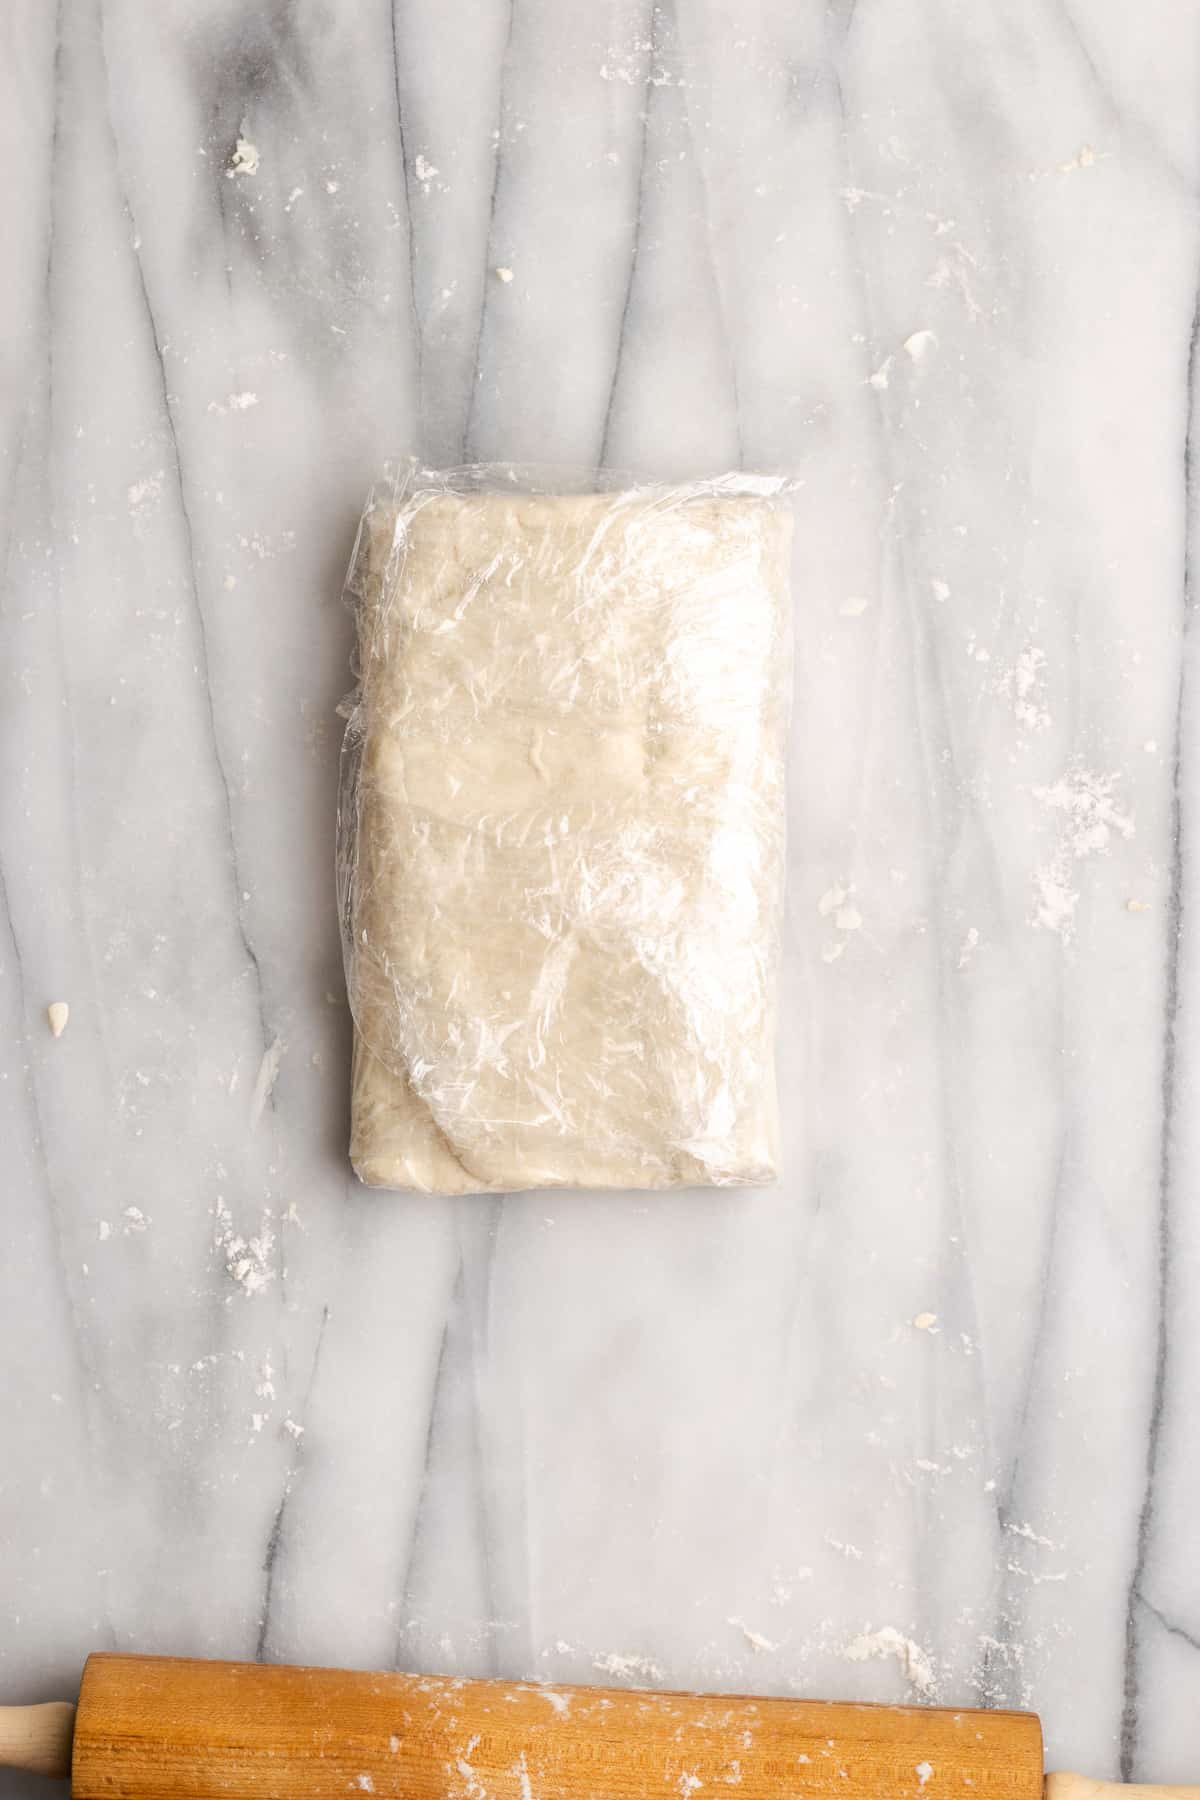 Puff pastry dough folded in an envelope, wrapped in plastic wrap